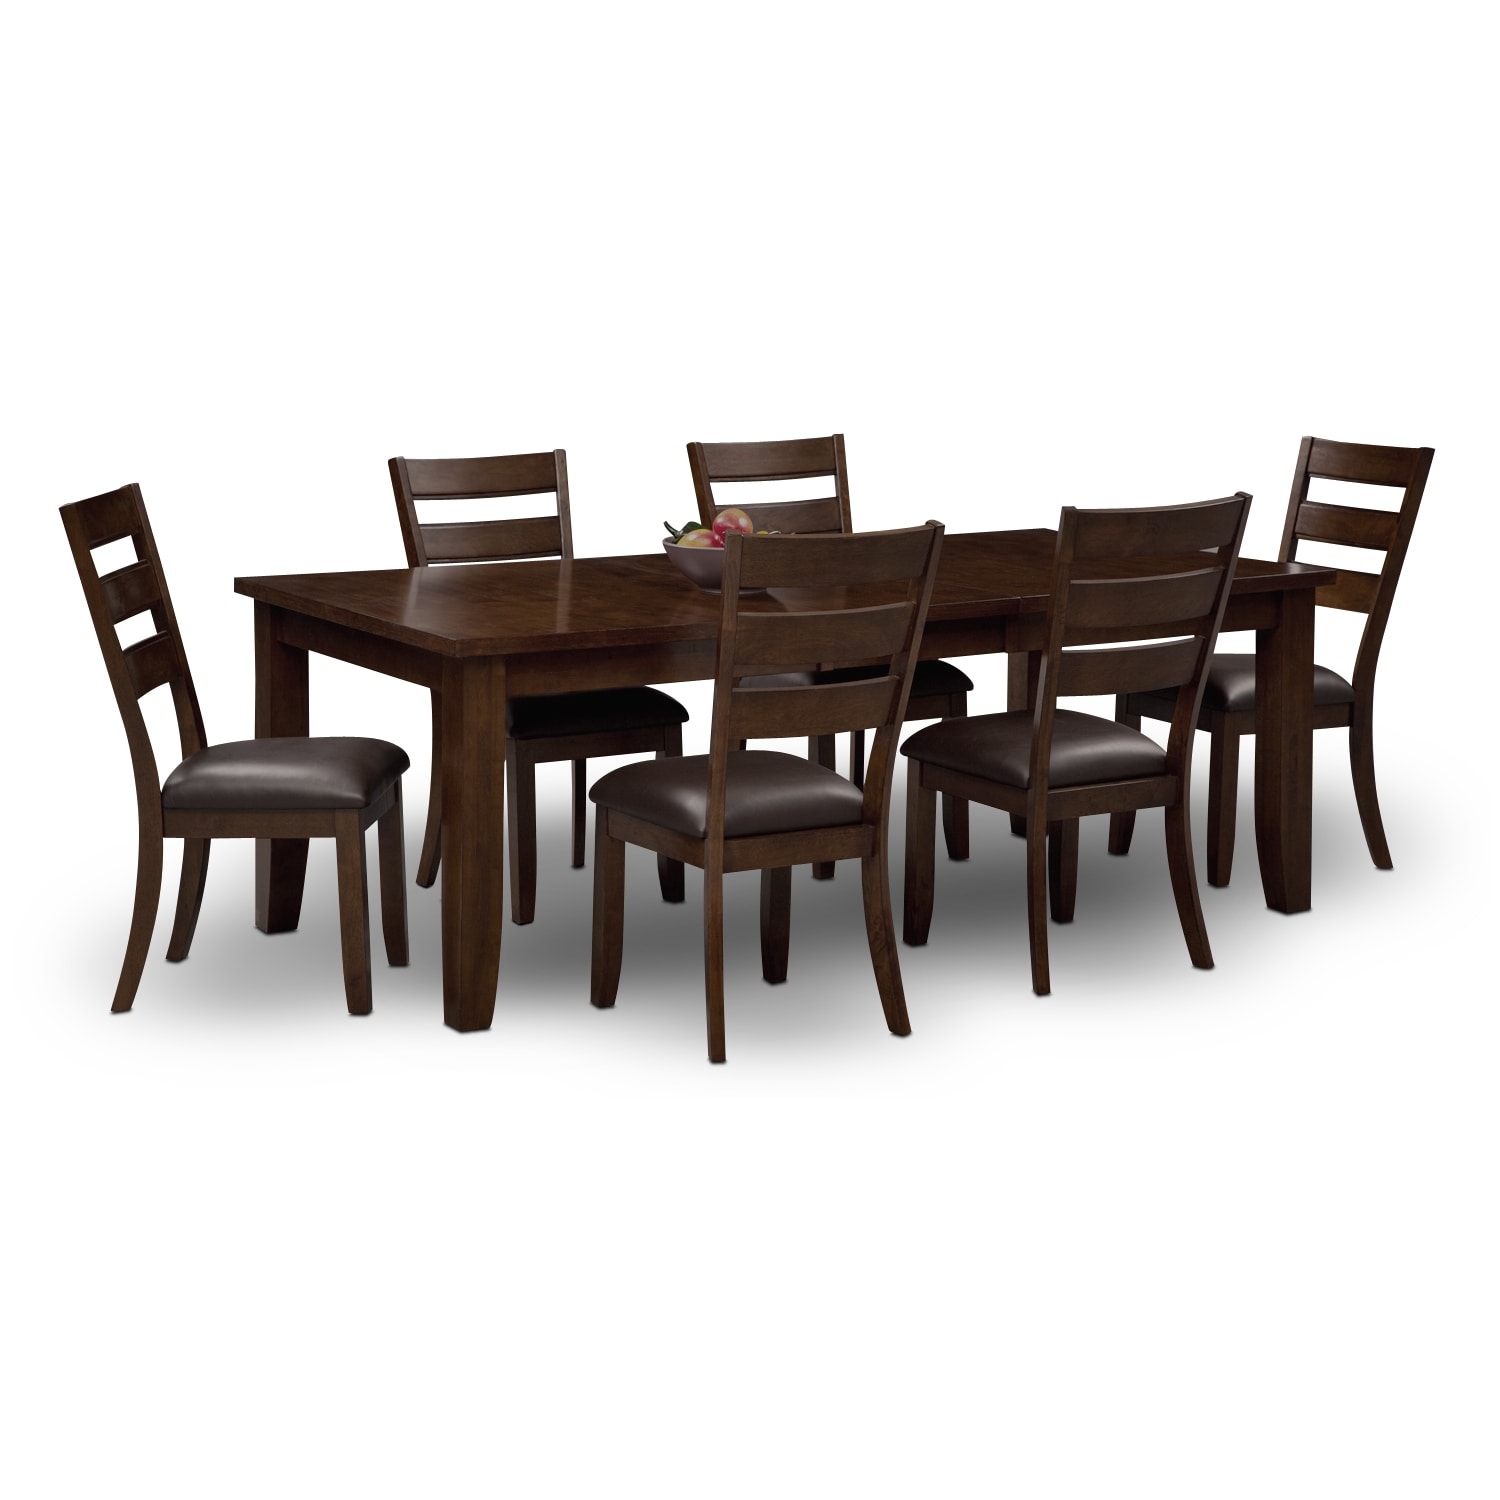 Value City Dining Room Tables, Value City Dining Room Furniture